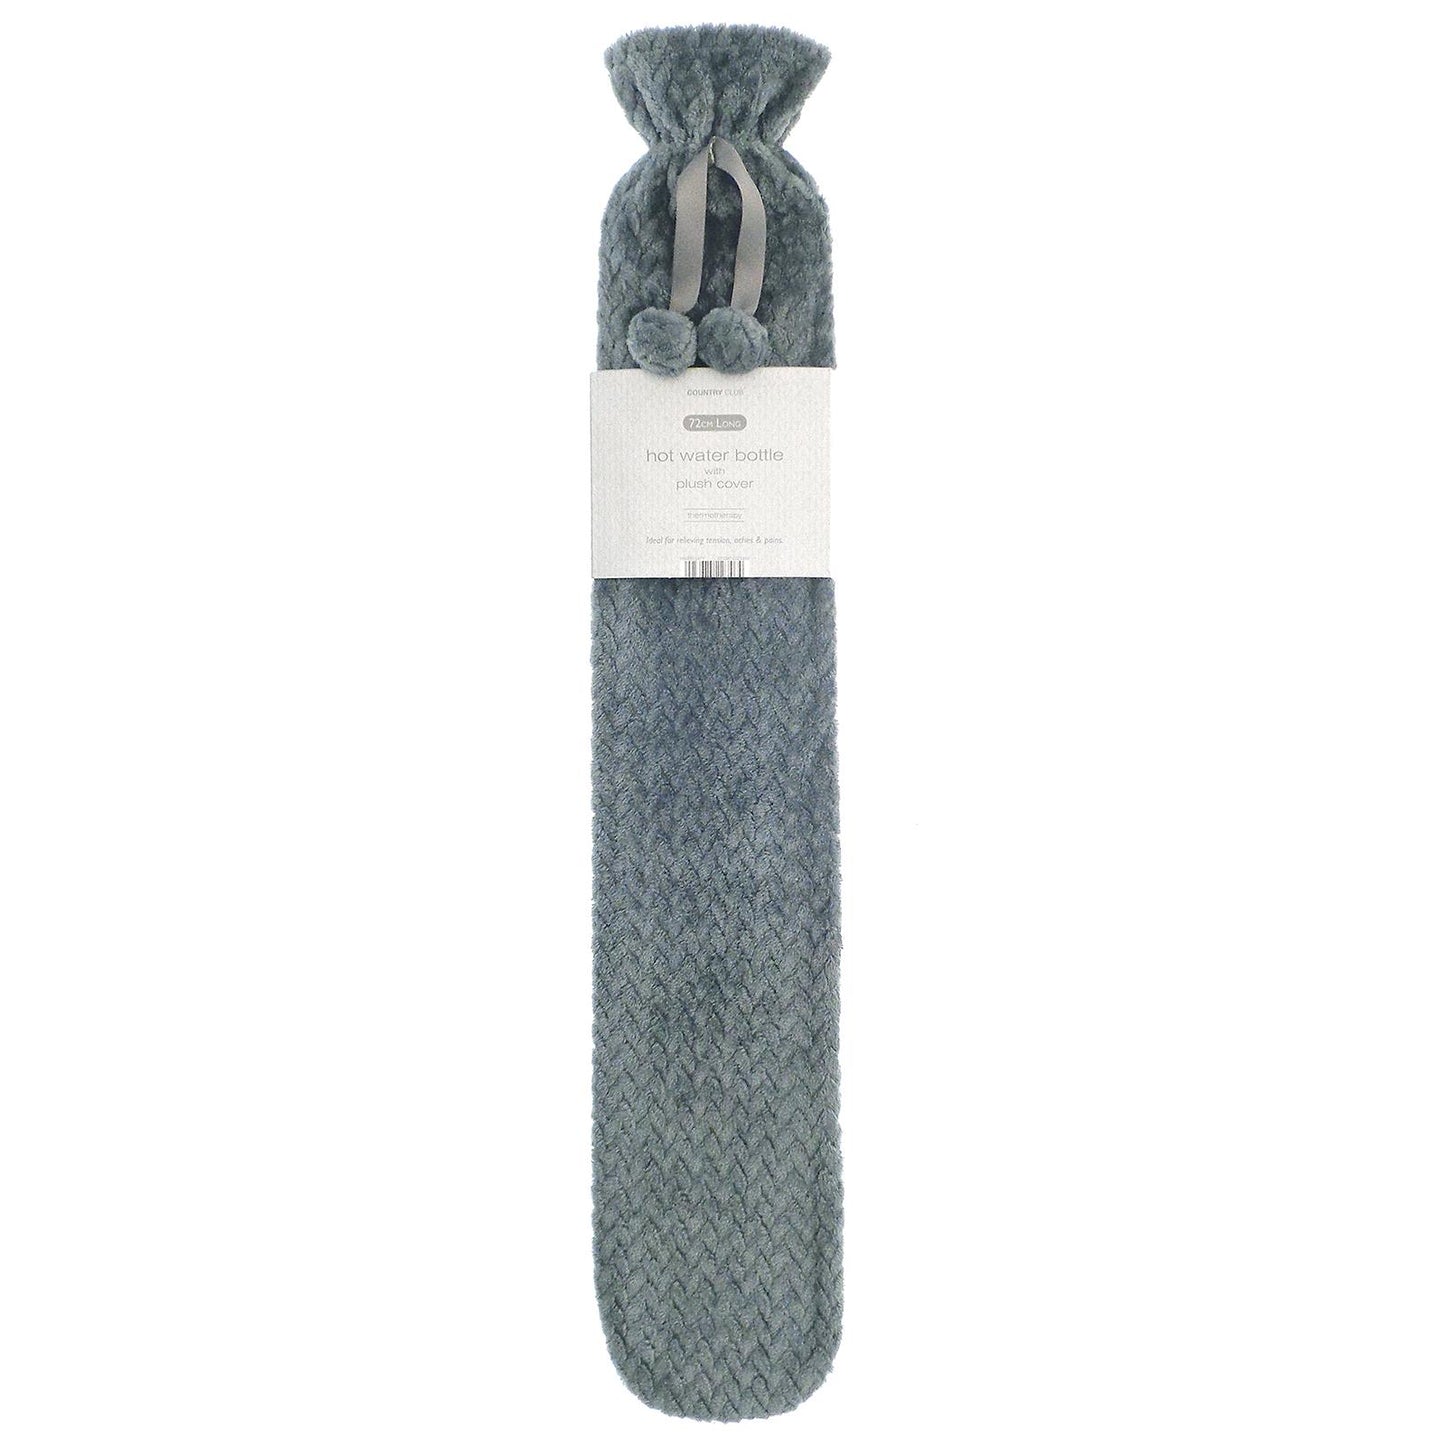 Extra Long 2L Hot Water Bottle with Soft Plush Cover